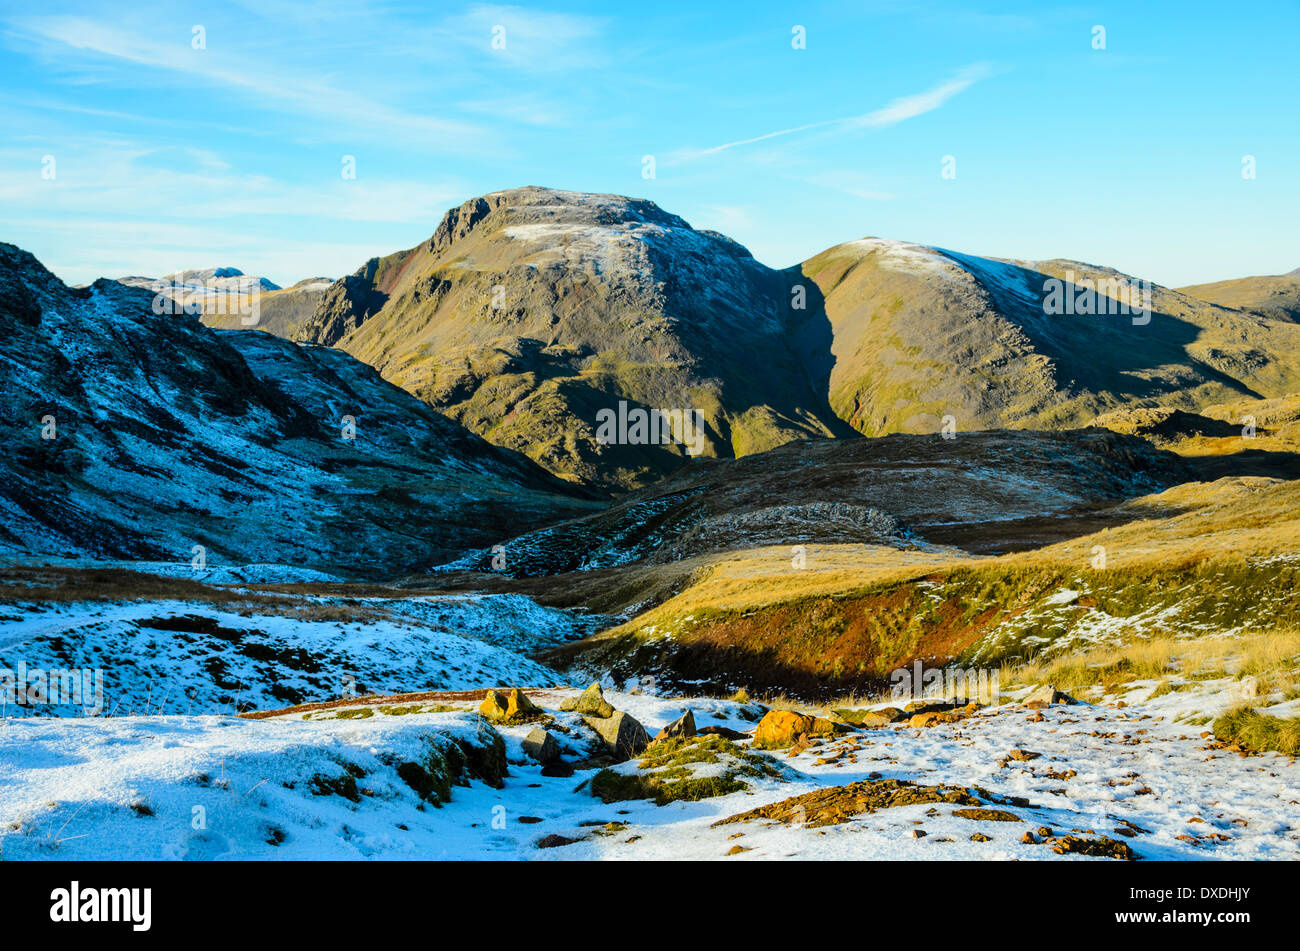 Near Esk Hause in the Lake District with Great Gable behind and the smaller Green Gable to its right Stock Photo